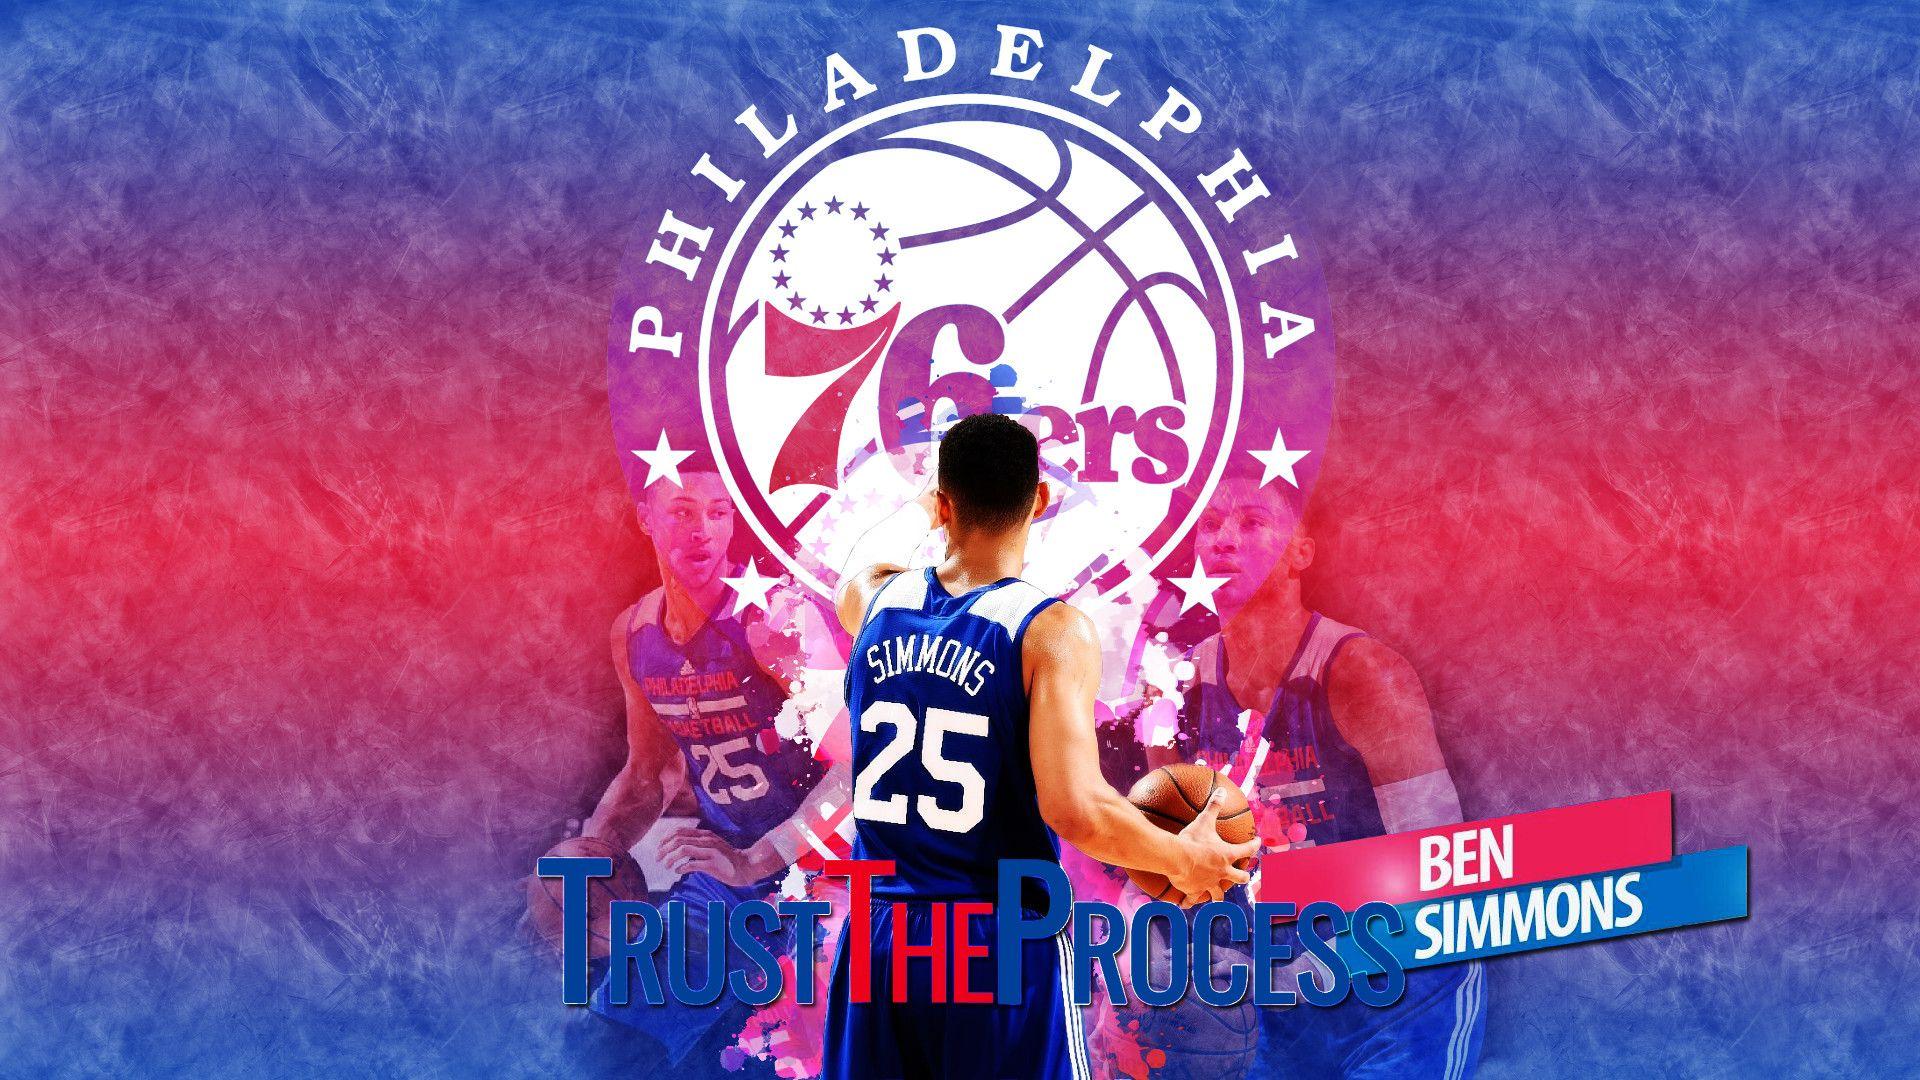 Wallpaper Wednesday courtesy of Ben Simmons  rsixers